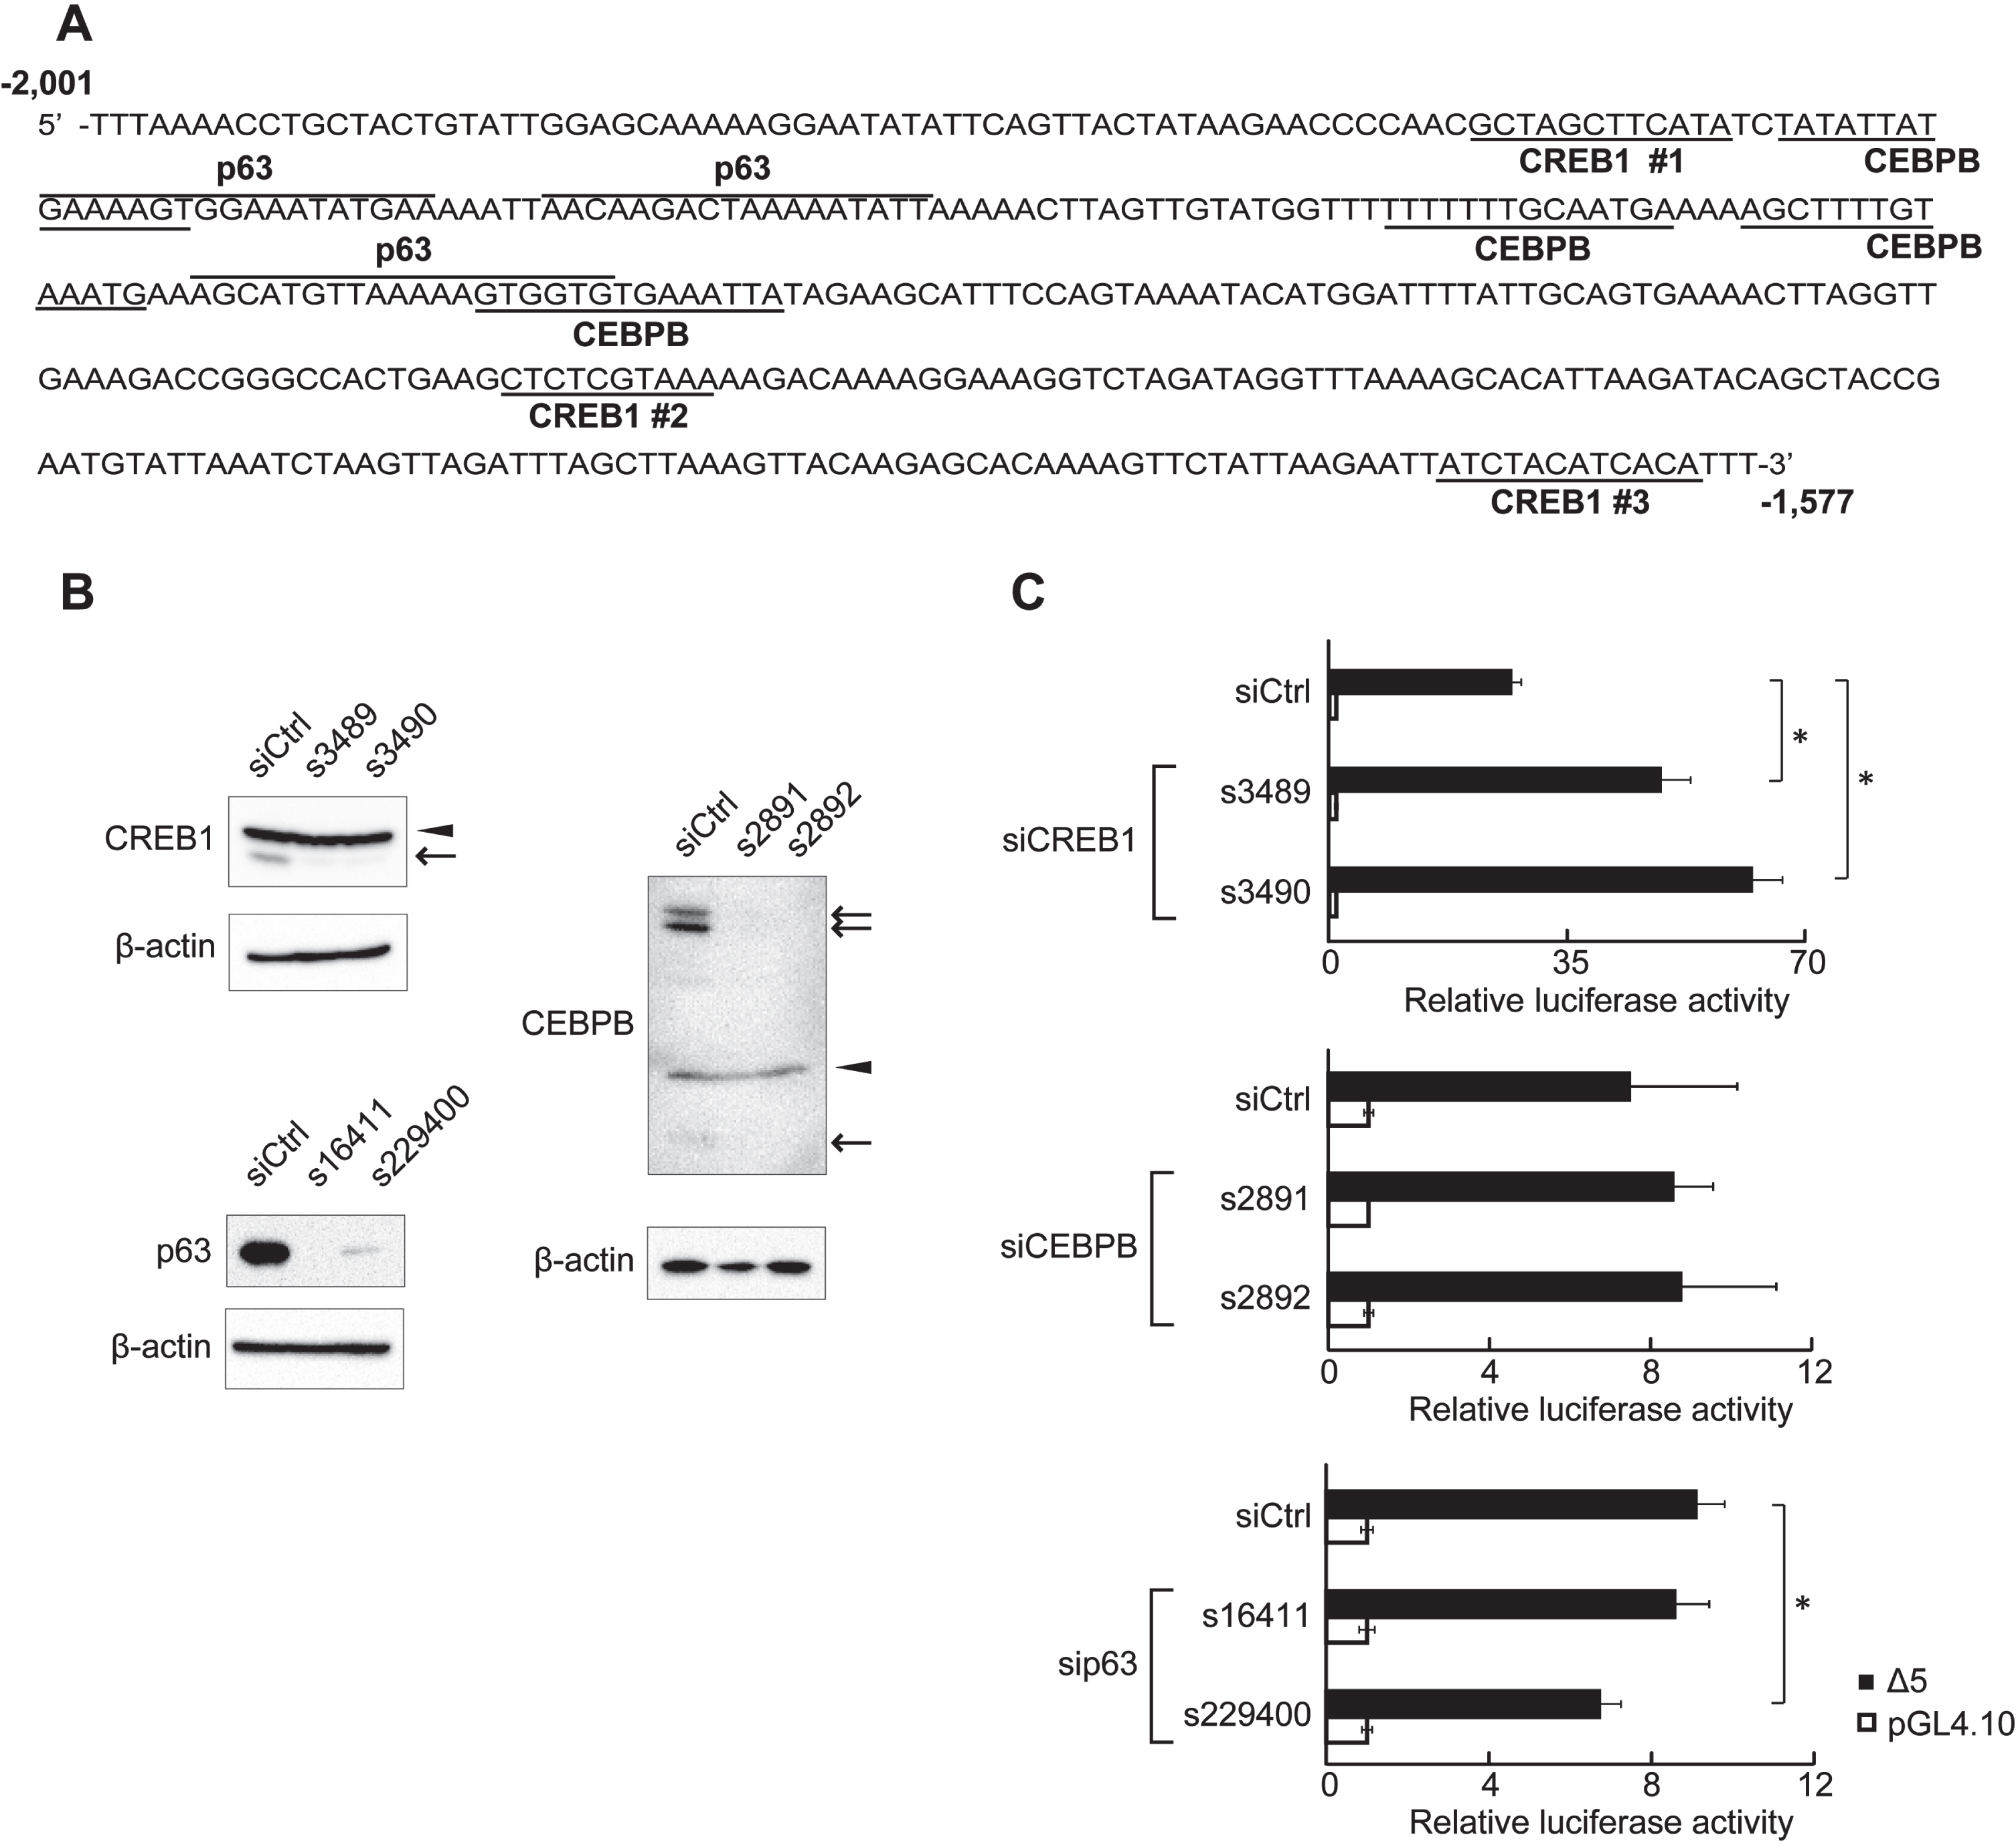 Putative transcription factor binding sites in the 425-region. (A) DNA sequence of the 425-region. The 425-region contained putative CREB1-, CEBPB-, and p63-binding sites. The 425-region contained three putative CREB1-binding sites. (B) Expression of endogenous proteins after siRNA transfection was analyzed by western blot. CREB1 and CEBPB isoforms are indicated by arrows. Non-specific bands are indicated by arrowheads. β-actin was used as an internal control. (C) RLA of clone Δ5 at depletion of CREB1, CEBPB, or p63. HSC2 cells transfected with CREB1 siRNA (s3489 and s3490), CEBPB siRNA (s2891 and s2892), p63 siRNA (s16411 and s229400), or negative control siRNA (siCtrl) were used. A reporter plasmid, pGL4.10, was used as control for reporter assays. The data are represented as means±SD (n = 4). *, P < 0.05 compared to siCtrl.